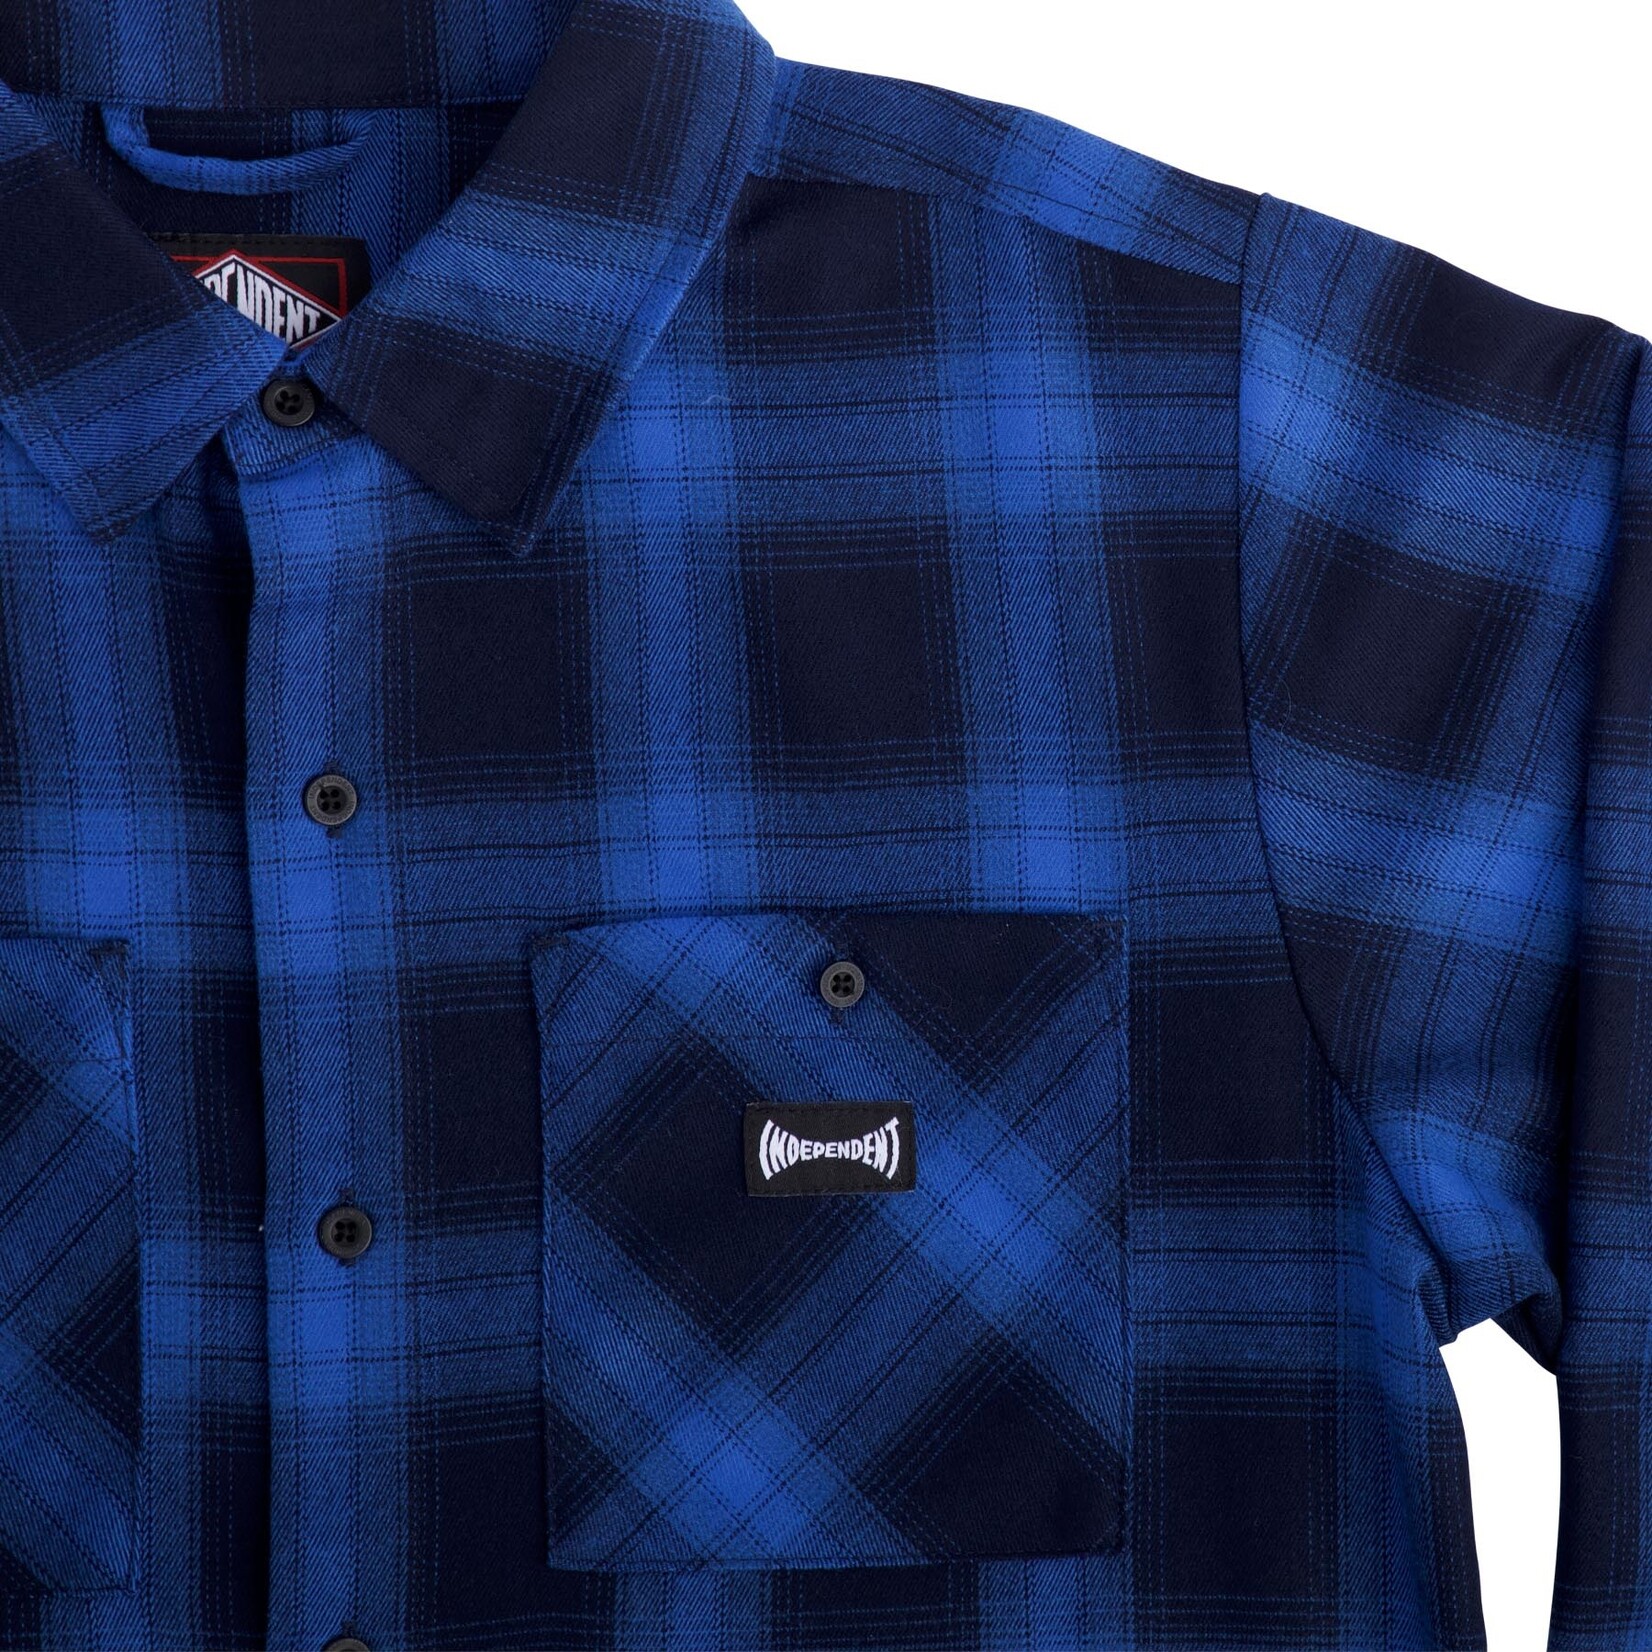 Independent Independent - Legacy Flannel - Top Blue -